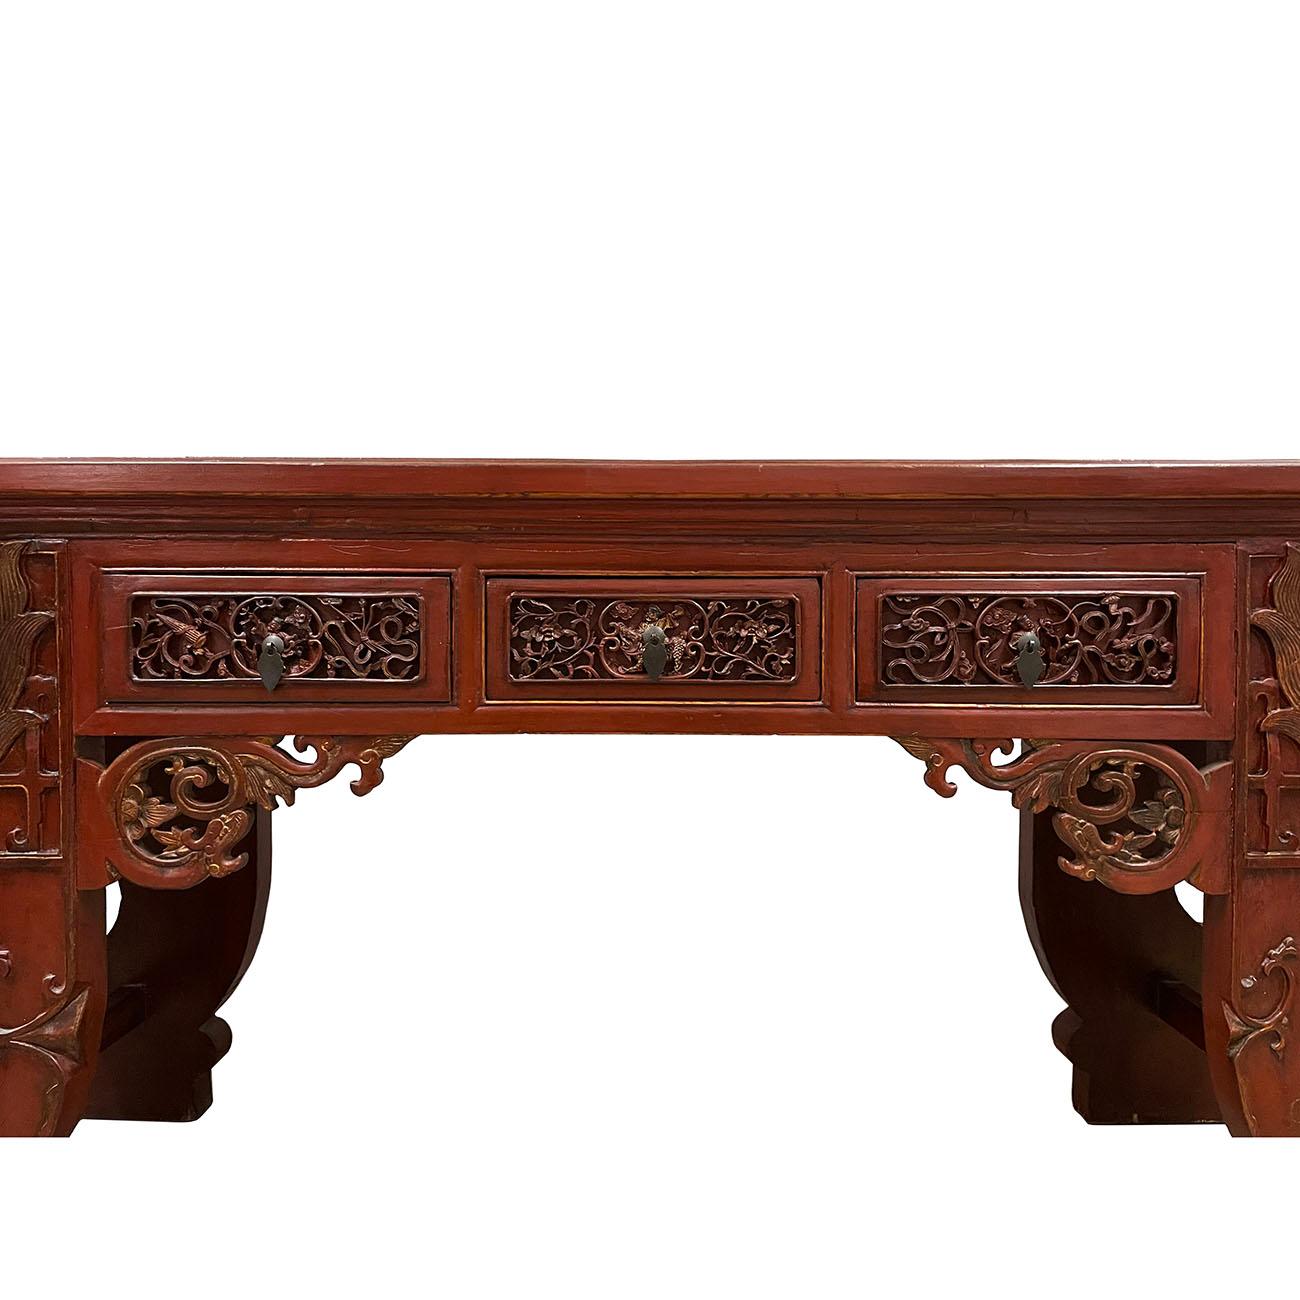 Wood 19th Century, Antique Chinese Massive Red Lacquered Carved Altar Table / Console For Sale